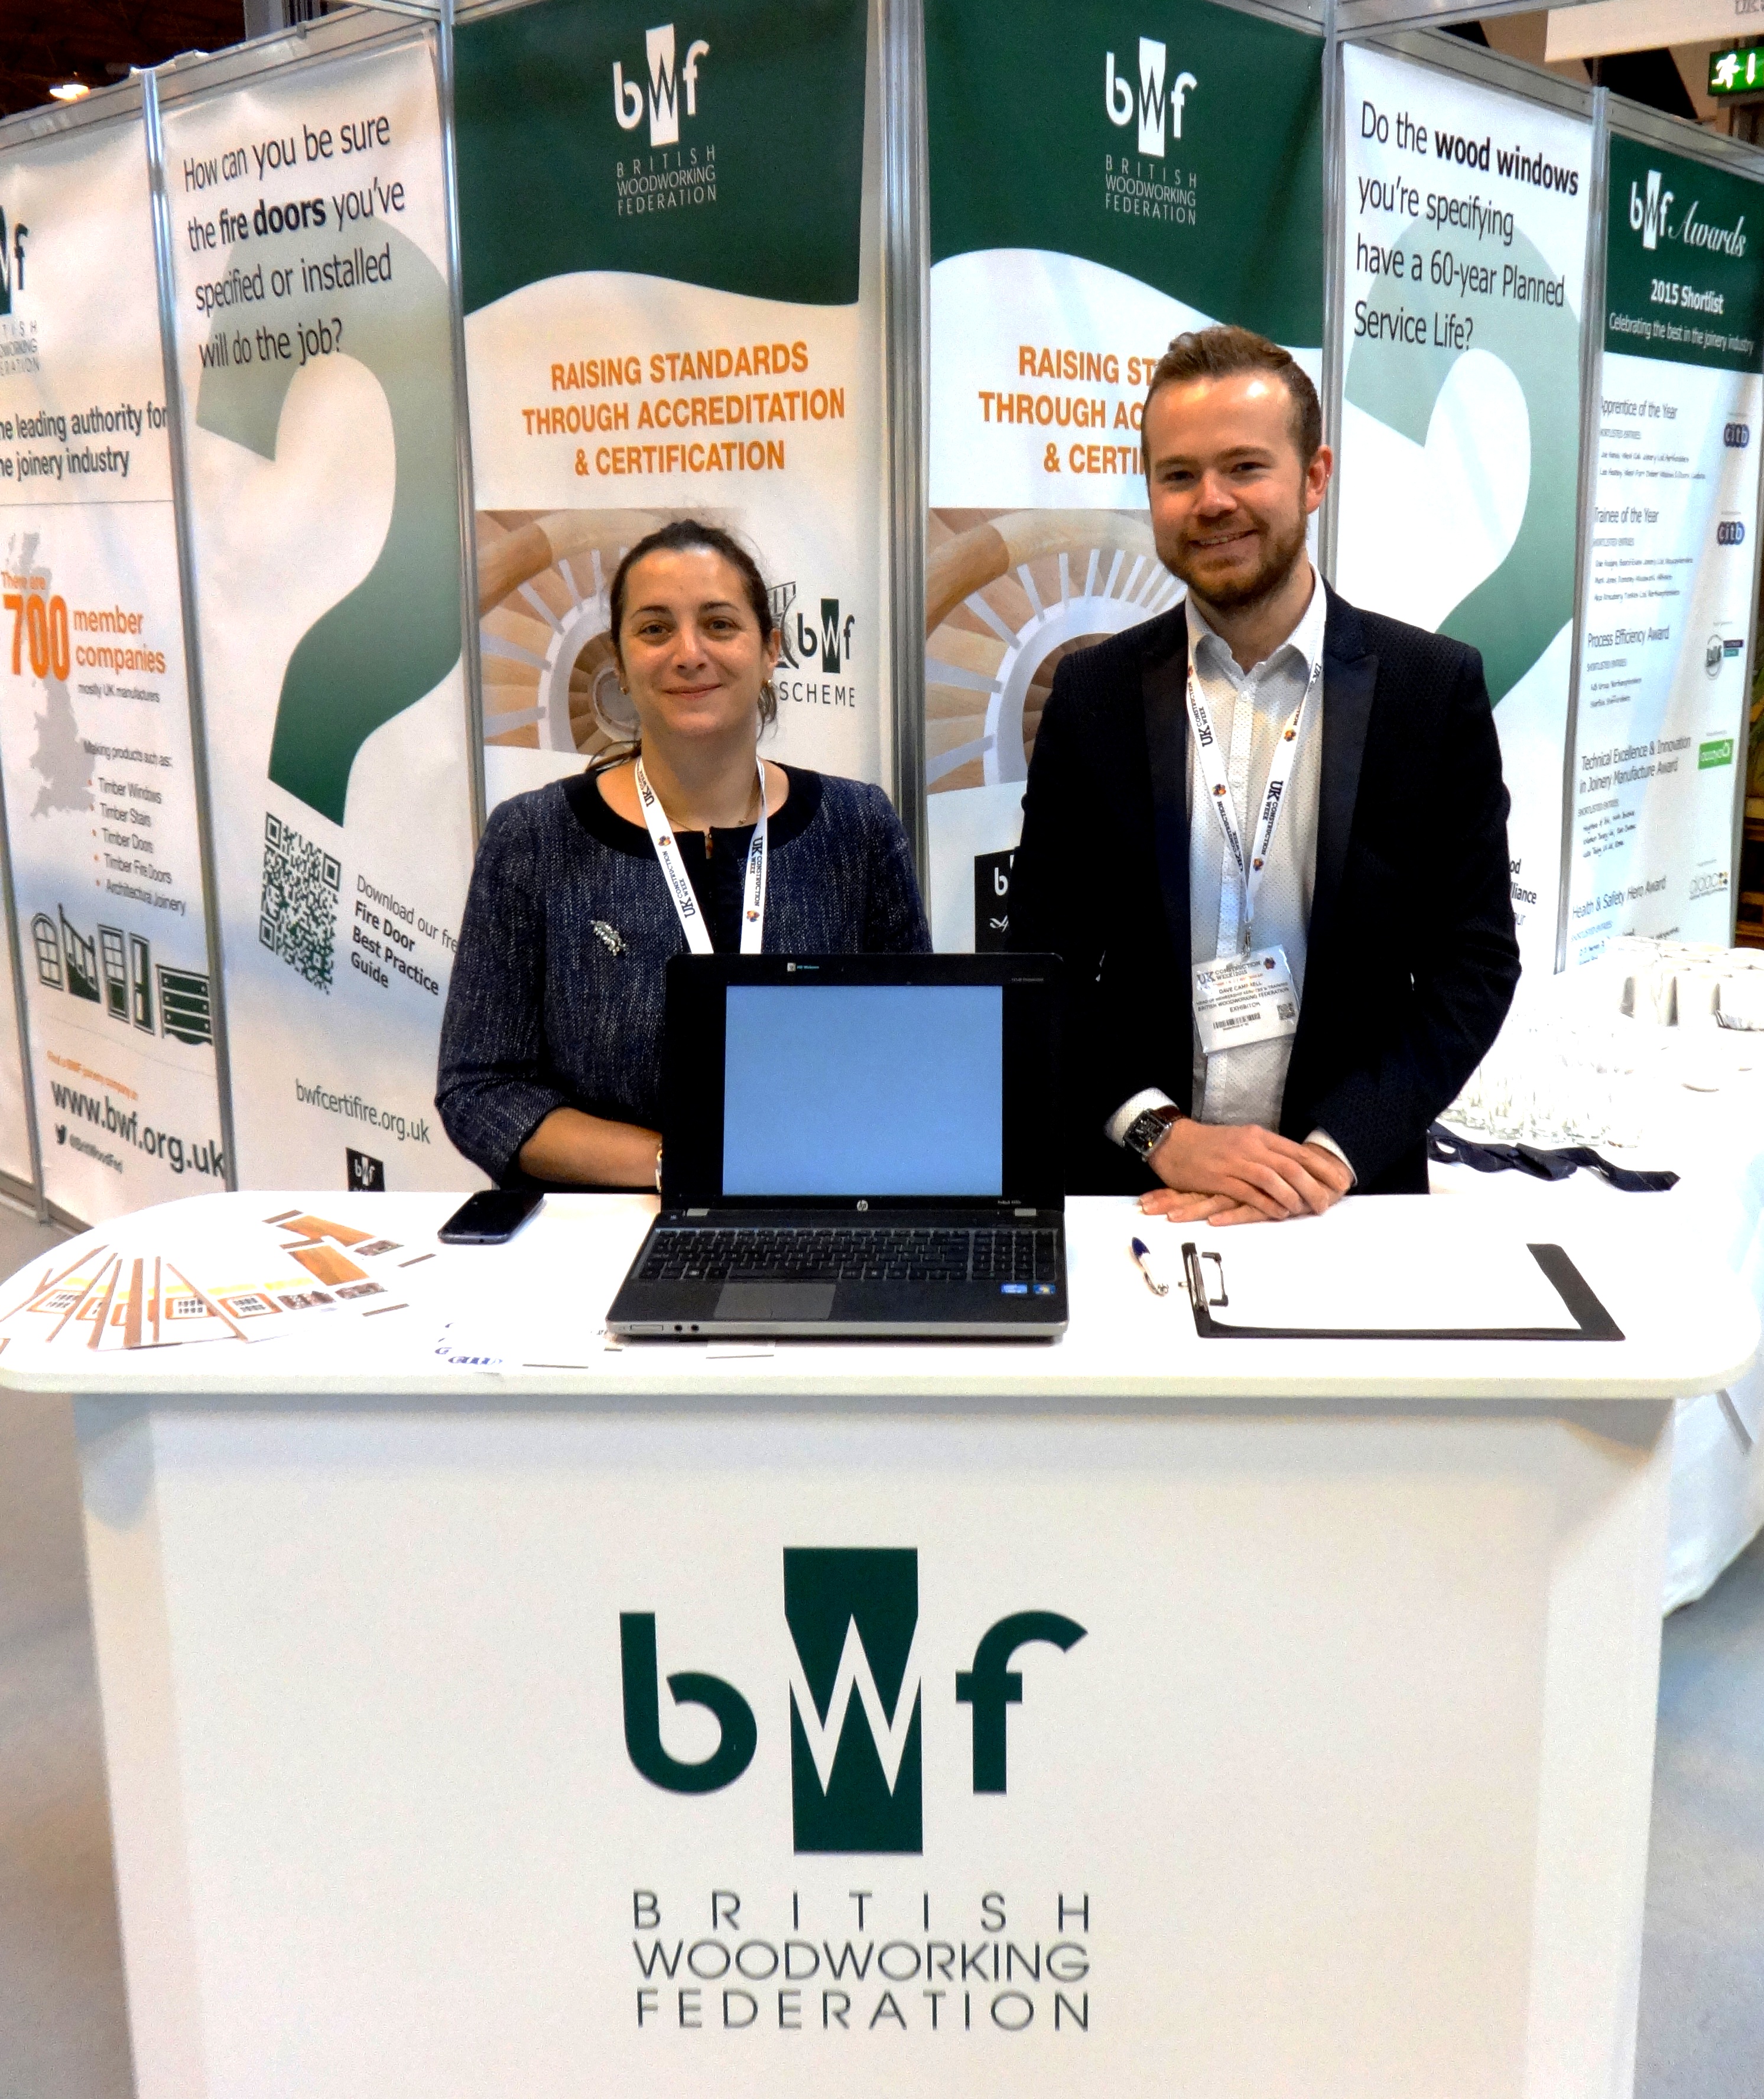 Meet the BWF team of experts at the Education Zone (R500) at W Exhibition